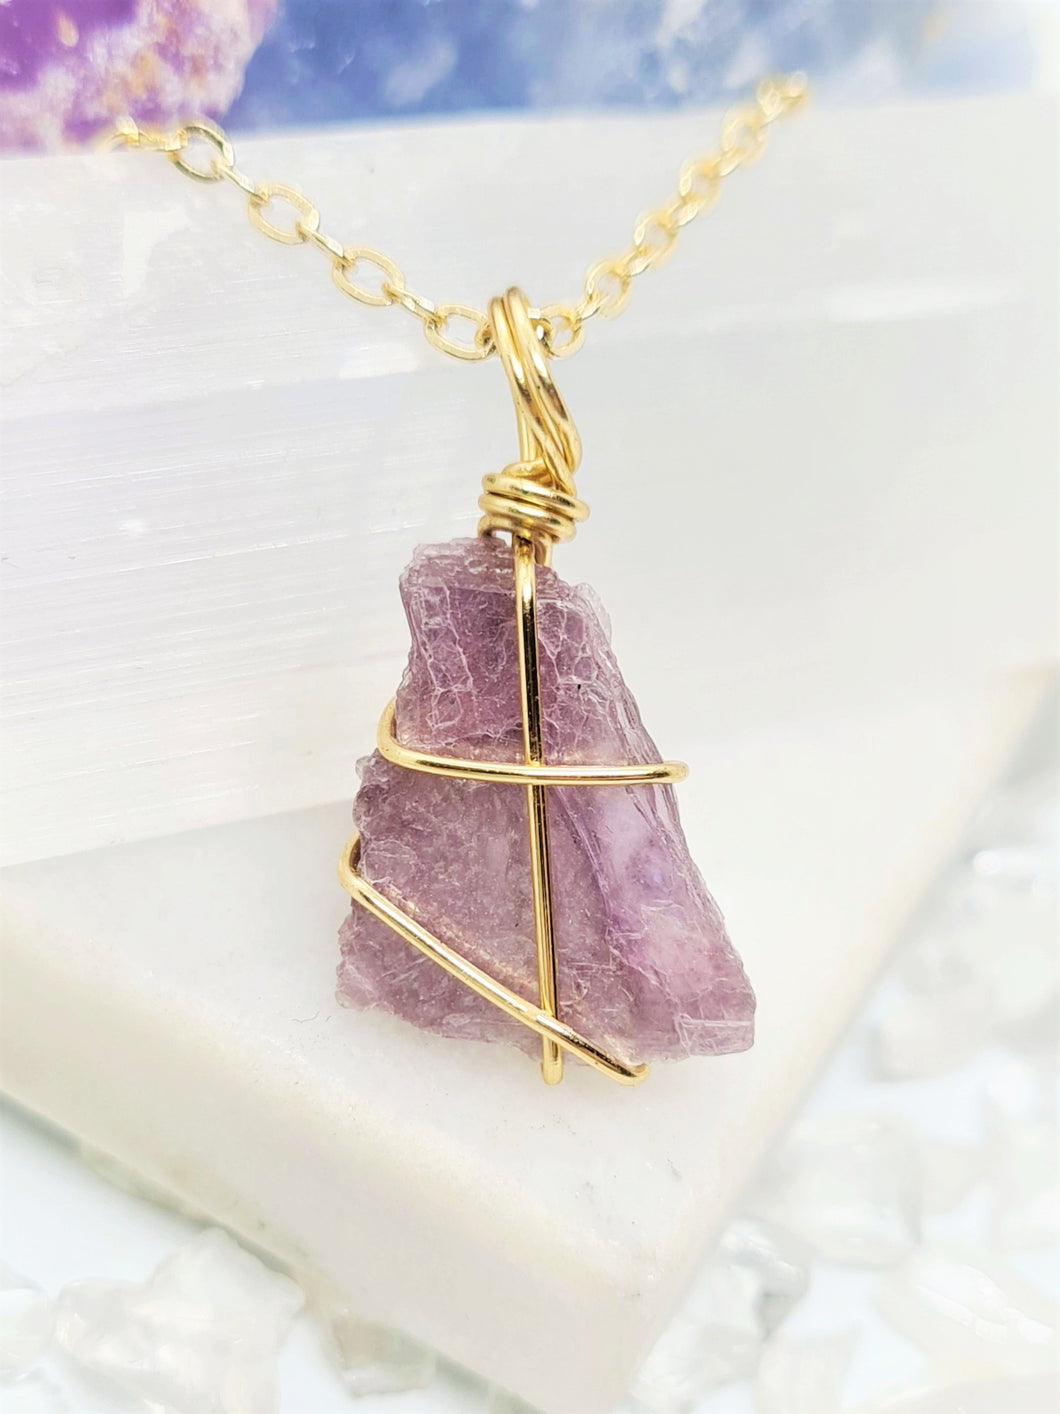 Soothing and serene, Lepidolite promotes a calm emotional state and is the perfect companion when experiencing periods of stress and anxiety